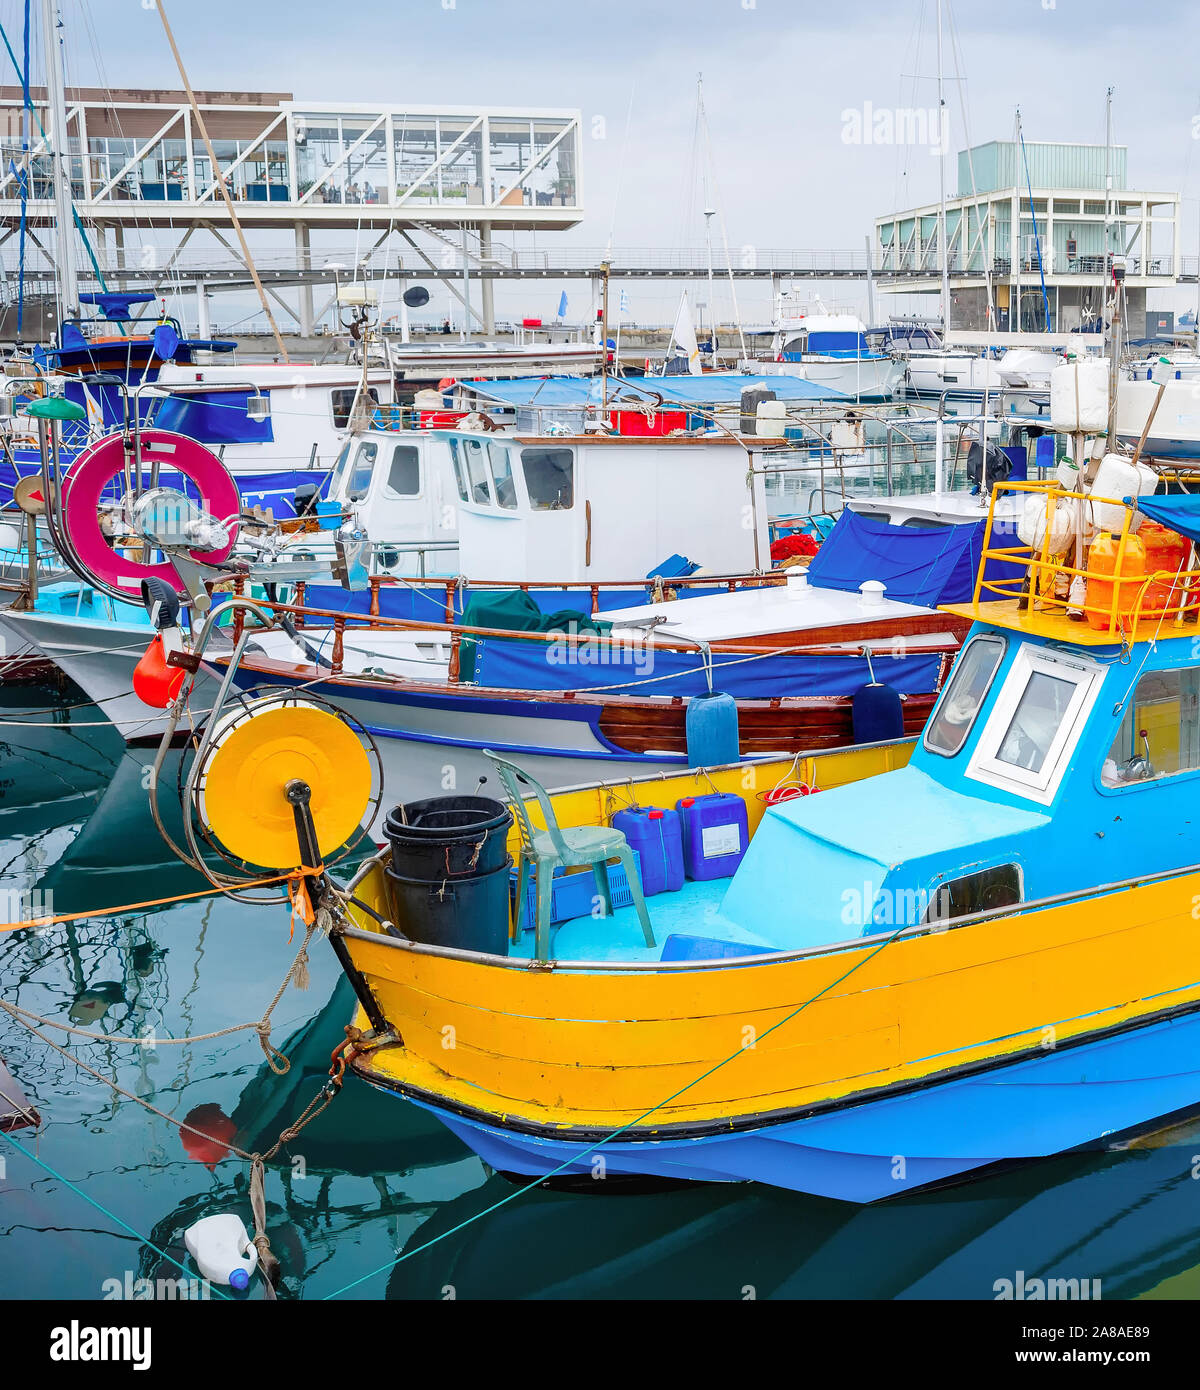 Colorful fishing boats moored in Limassol marina with restaurants on pier, Cyprus Stock Photo